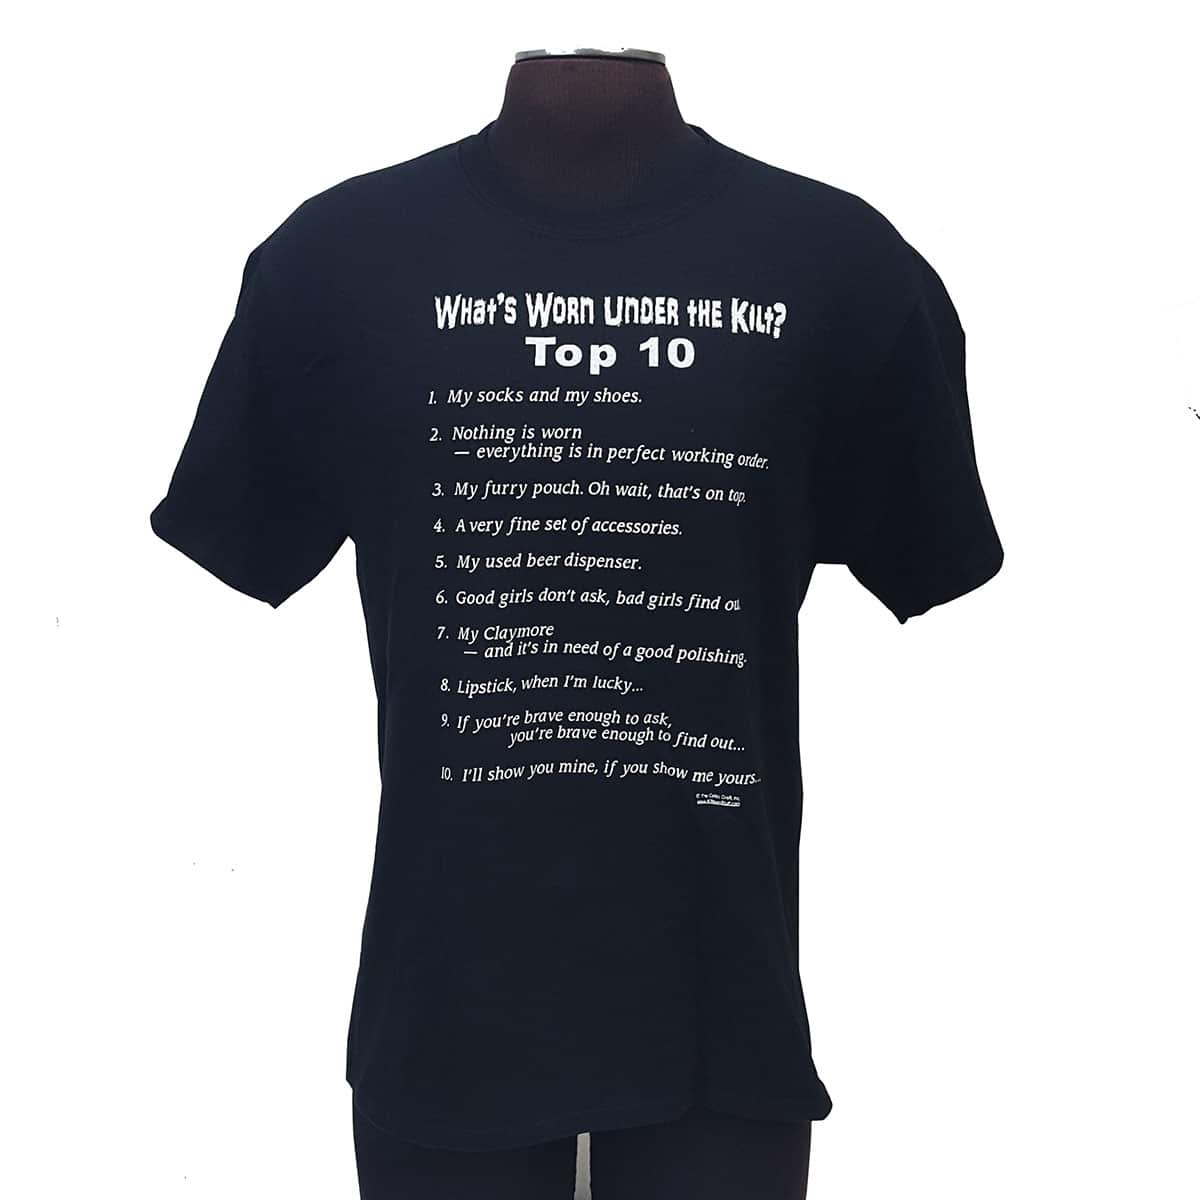 What's Under The Kilt? Top 10 T-Shirt—What's Your Answer